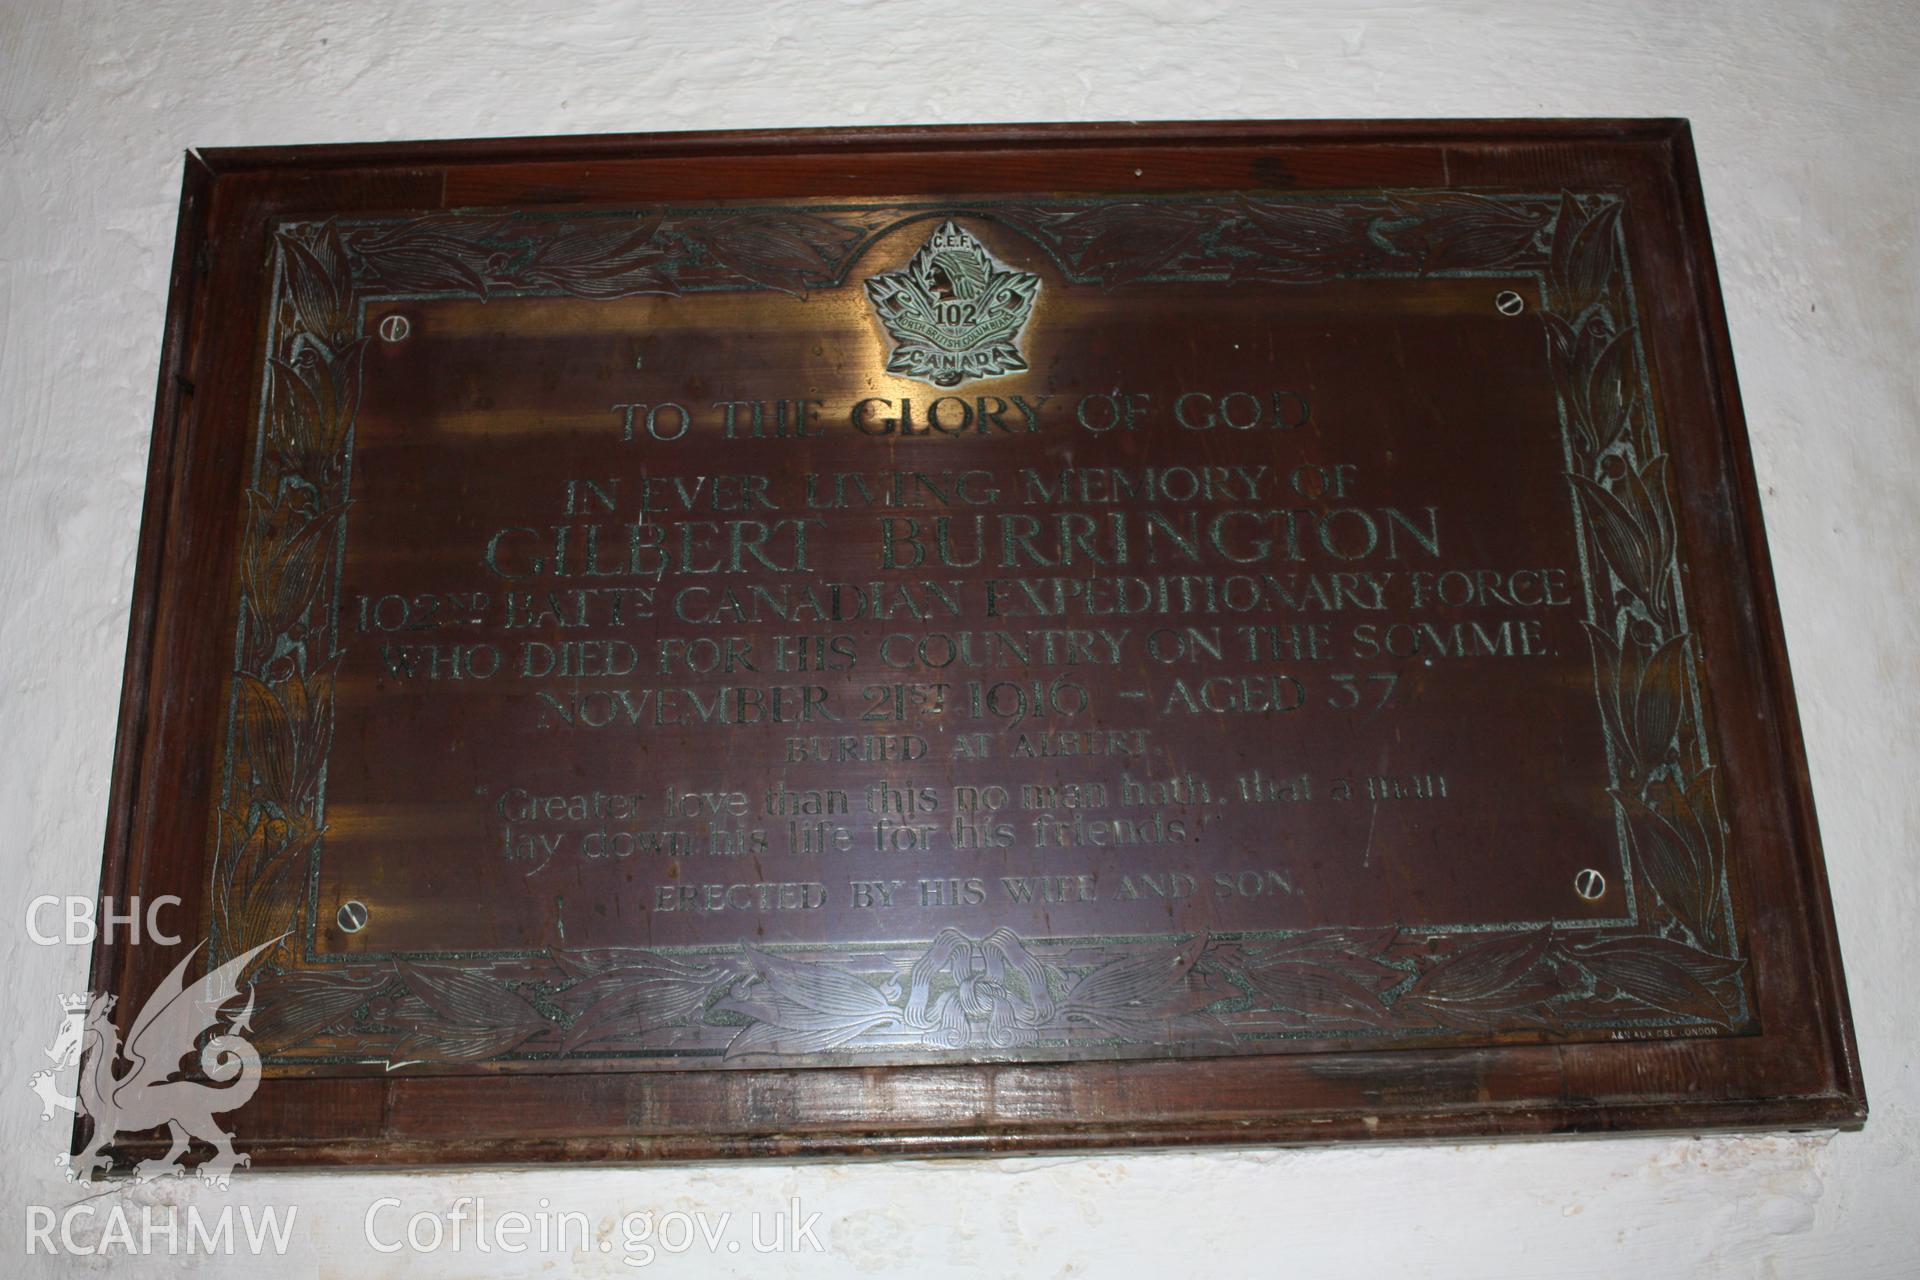 Memorial tablet to Gilbert Burrington killed at the Somme 21 November 1916 on south wall